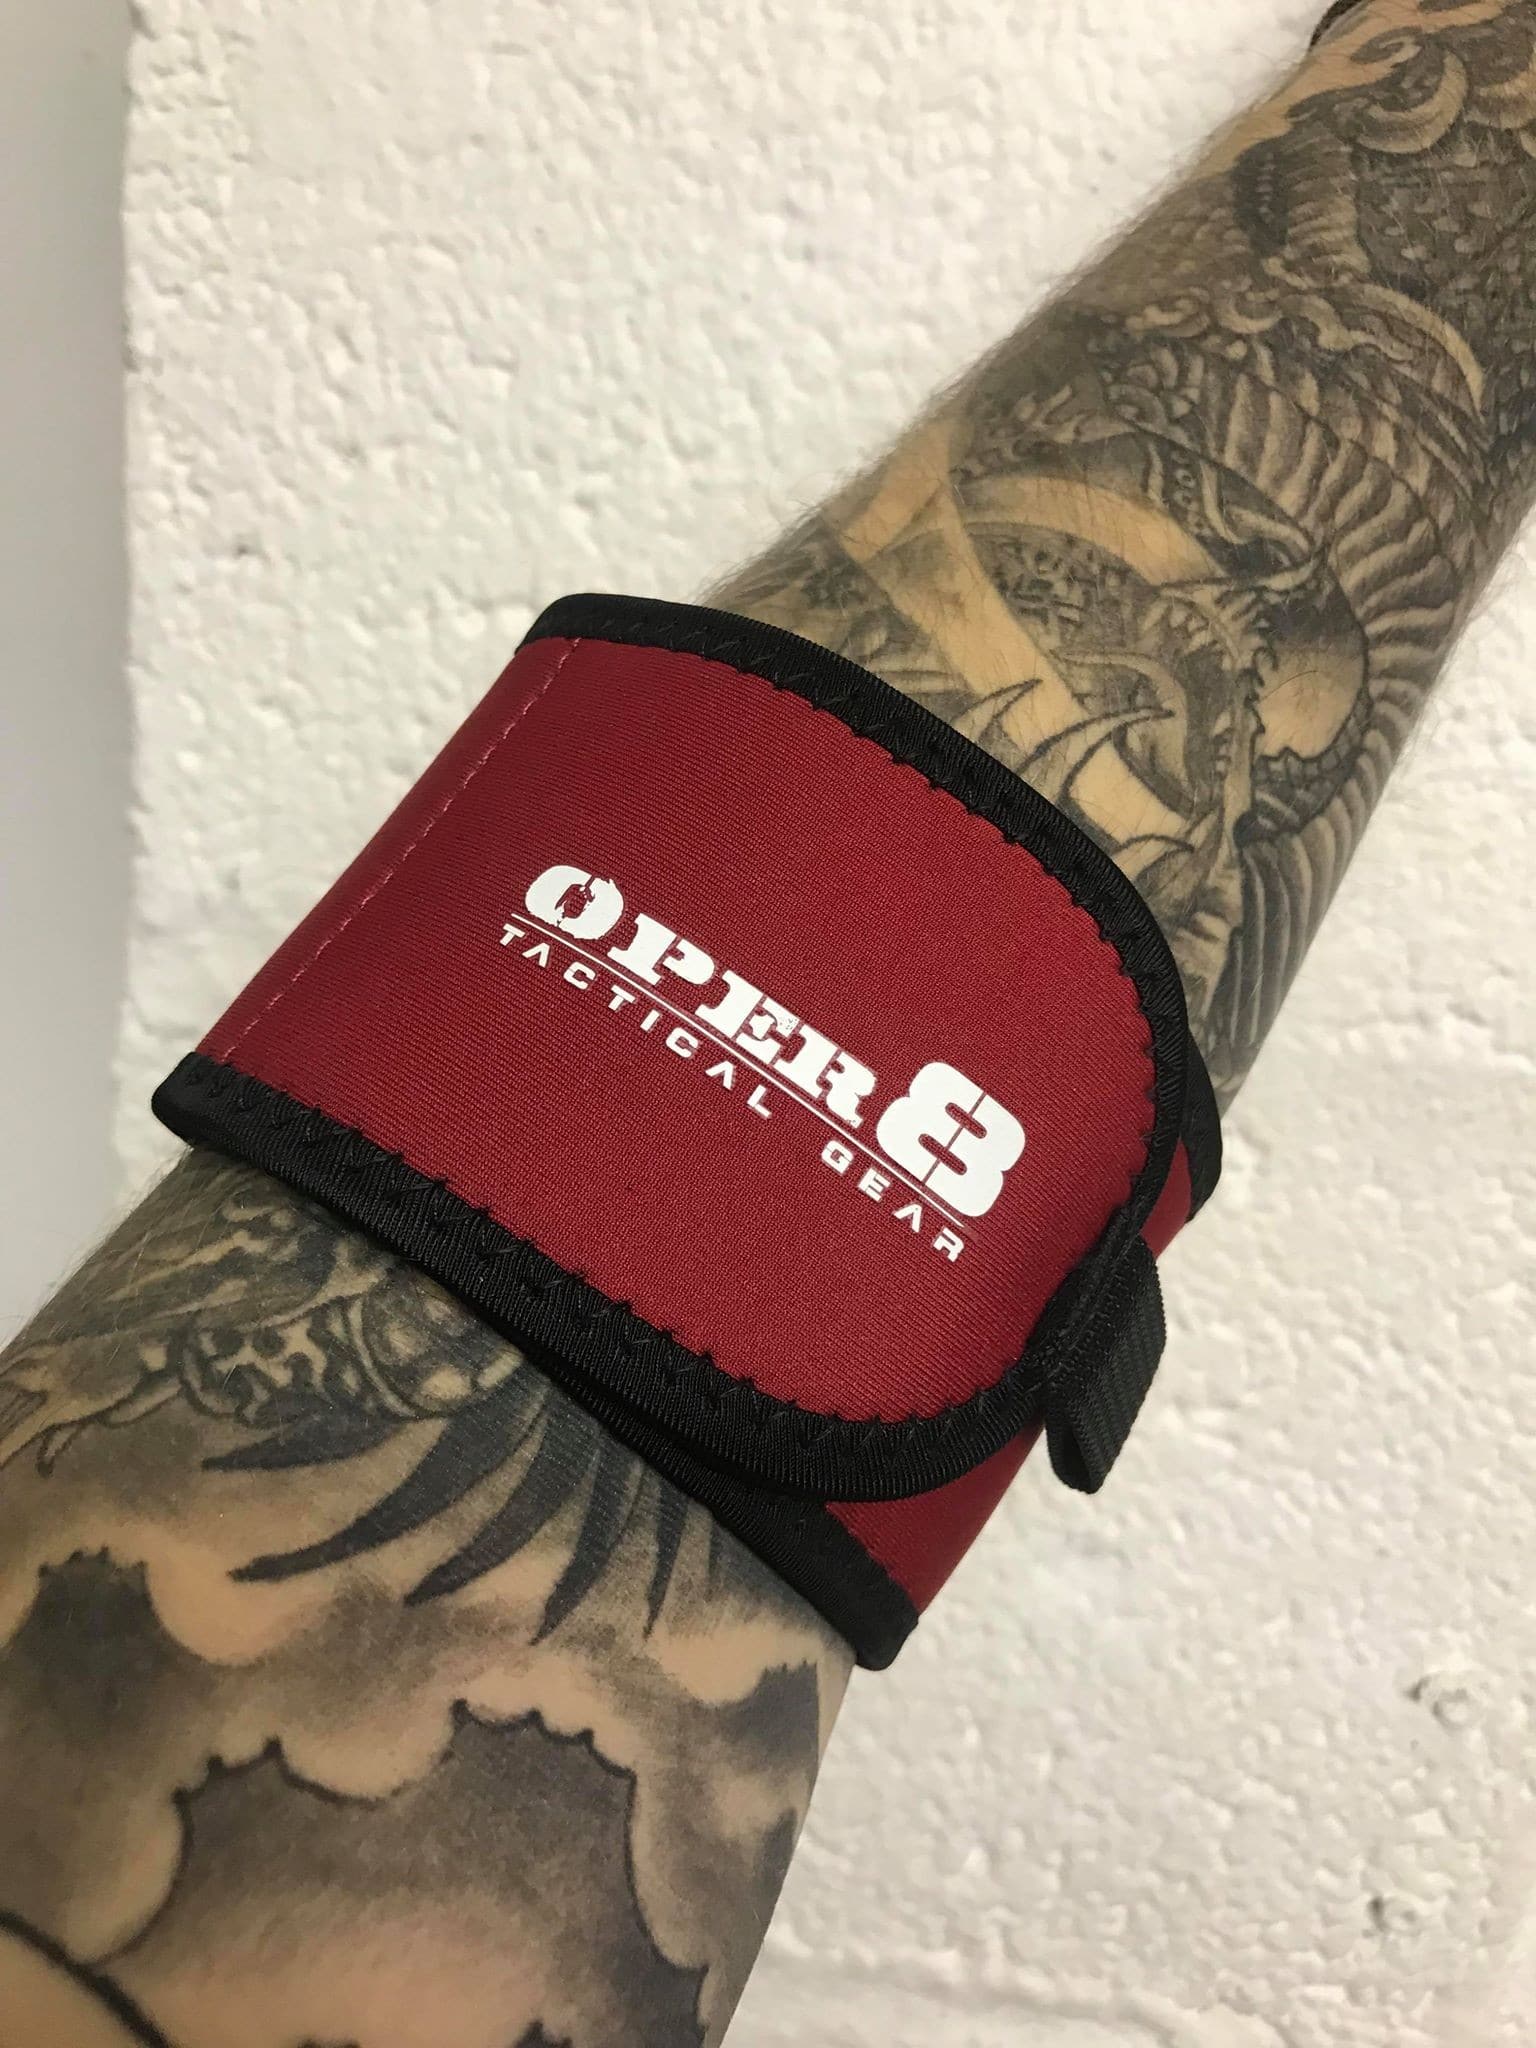 Oper8 Team Arm band (RED)